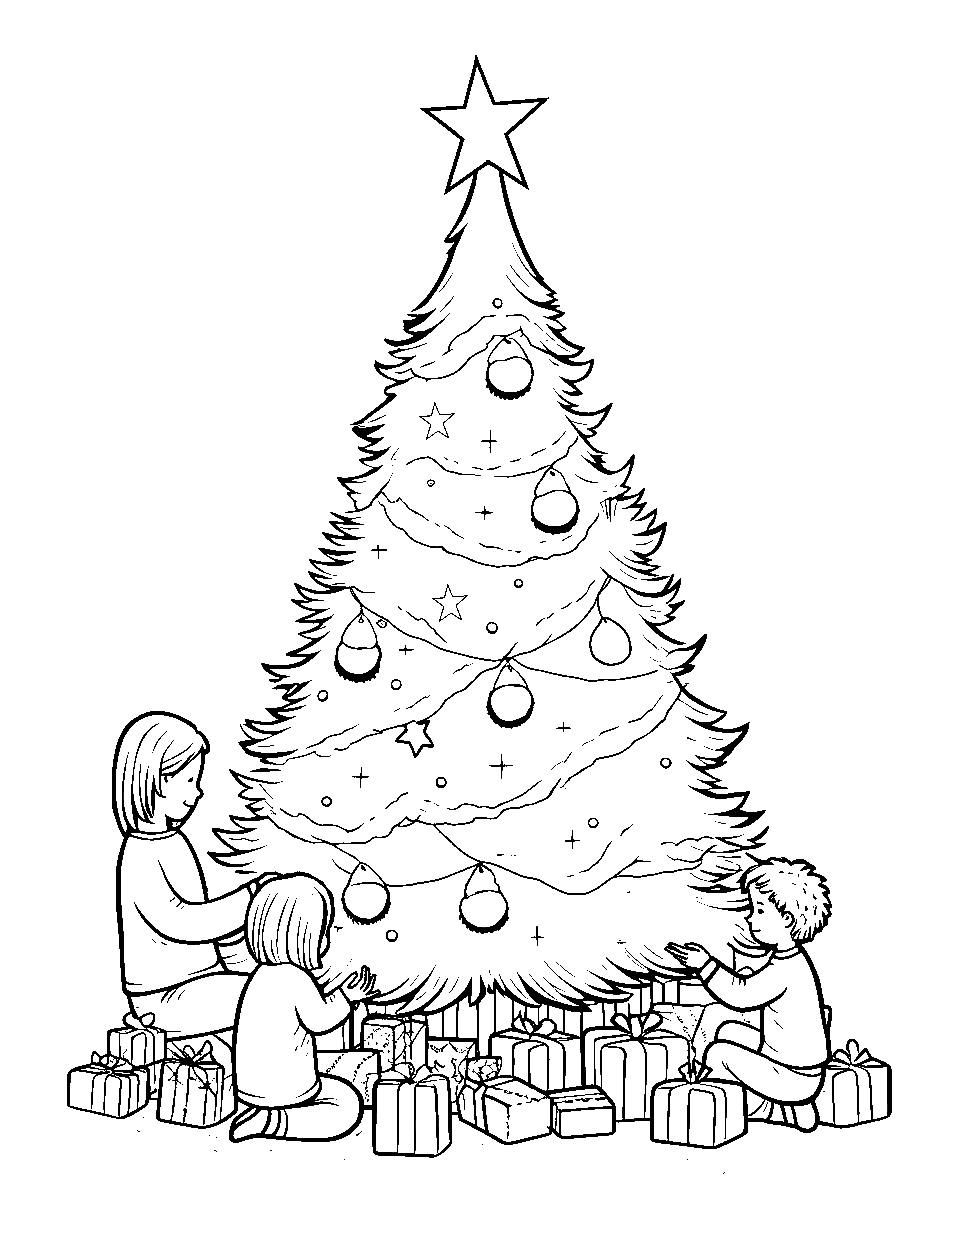 Family Gathering Around the Tree Coloring Page - A cozy family moment with parents and children gathered around the Christmas tree, sharing gifts.